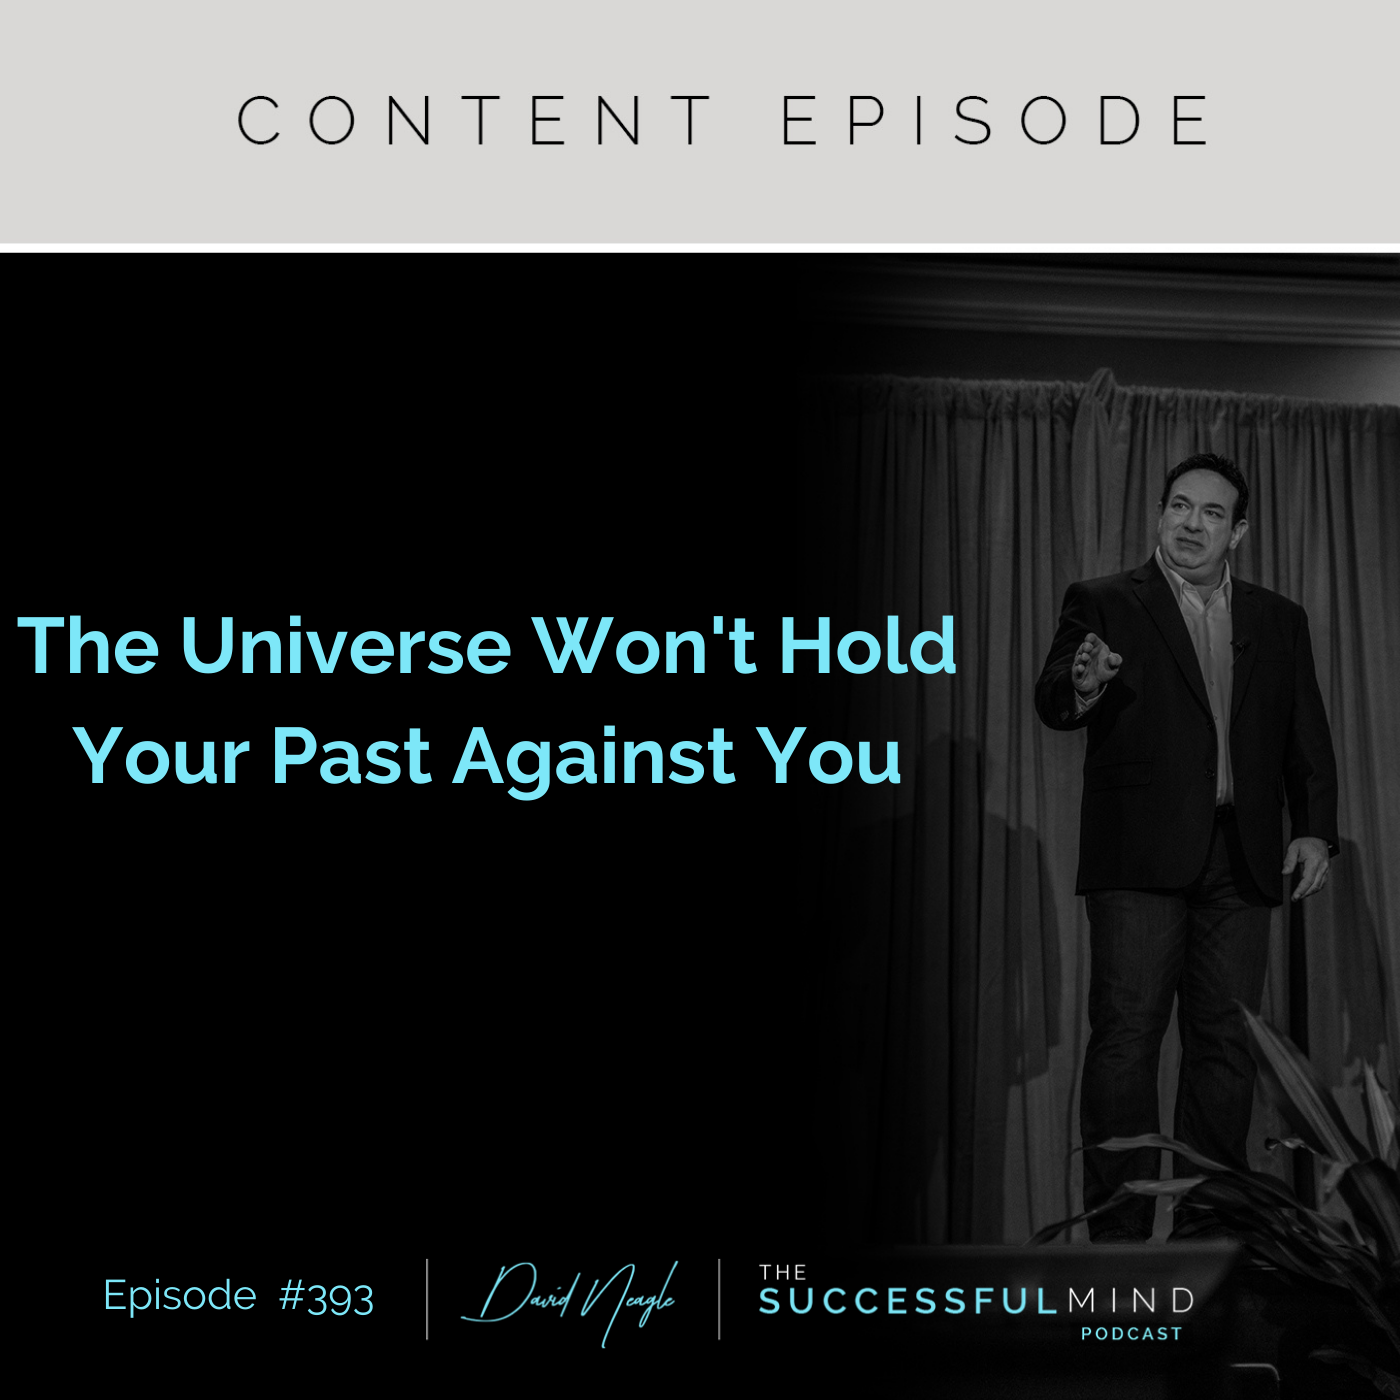 The Successful Mind Podcast - Episode 393 - The Universe Won't Hold Your Past Against You